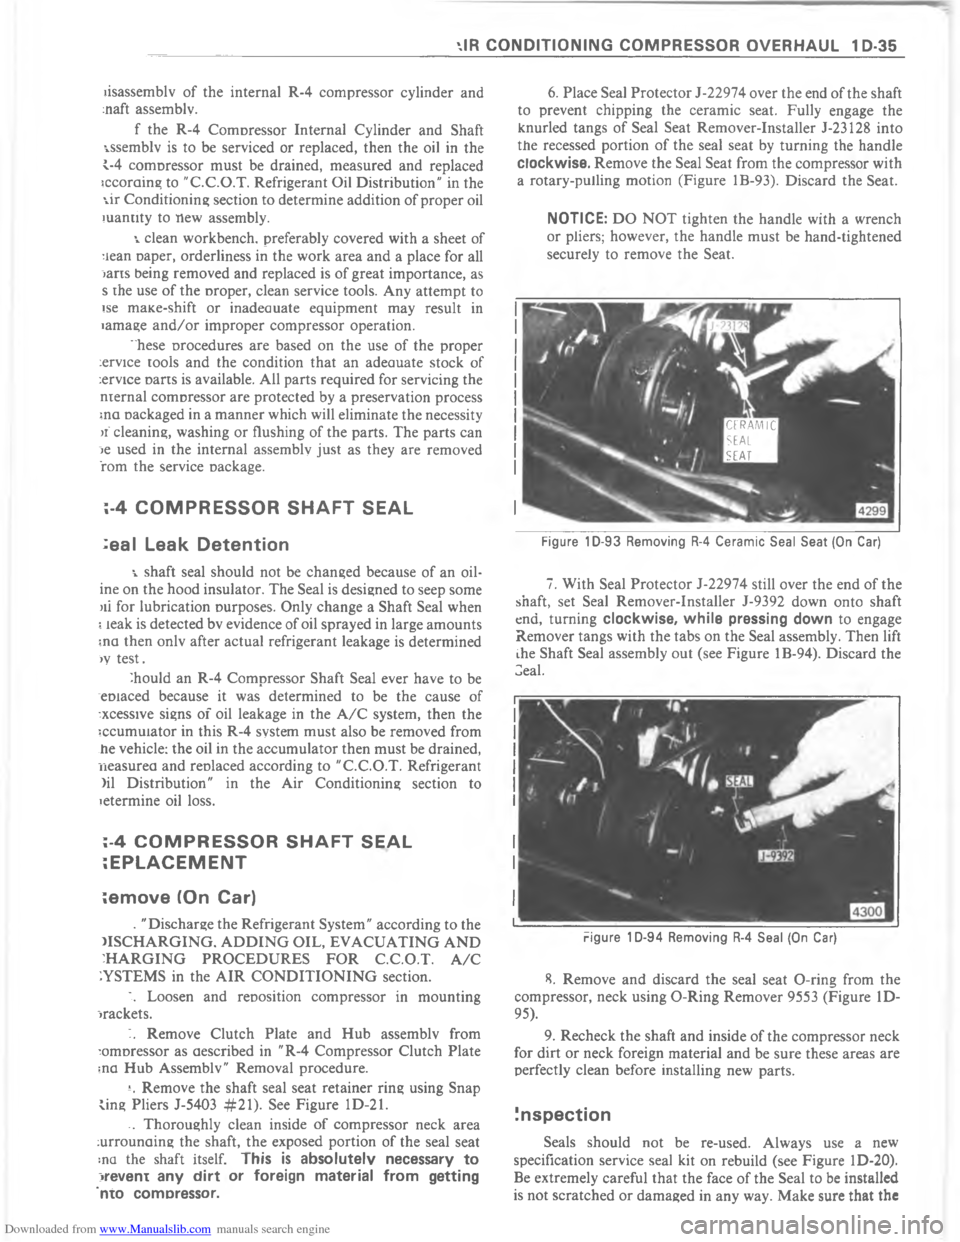 CHEVROLET IMPALA 1980 6.G Service Manual Downloaded from www.Manualslib.com manuals search engine  	    @ 	           	    ) 5>           	   


&
